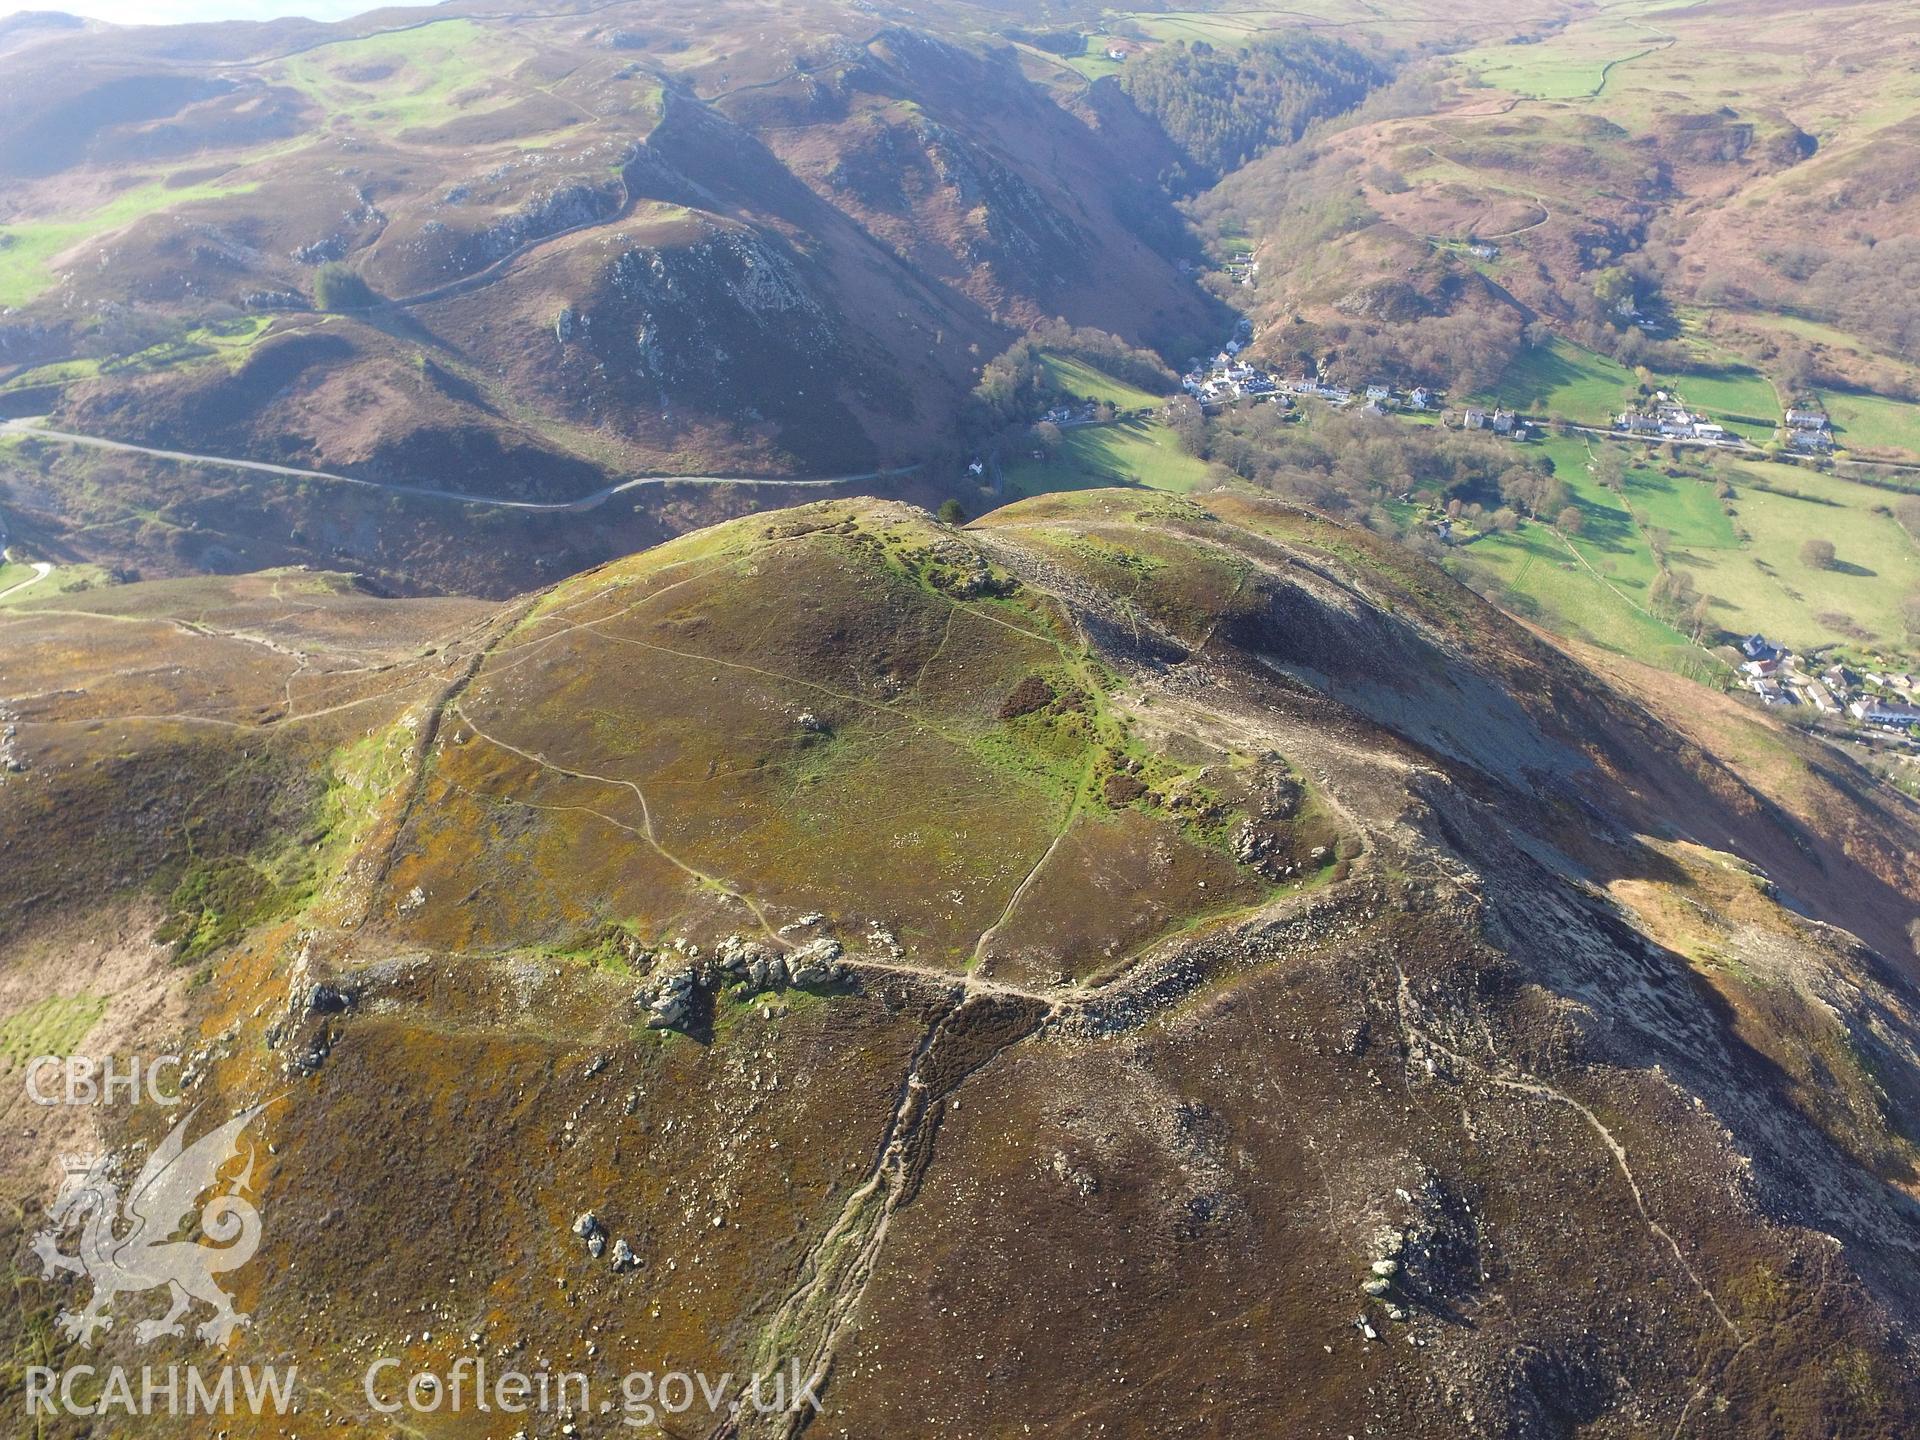 Colour photo showing aerial view of Dinas Allt Wen, a hillfort above Dwygyfylchi, Penmaenmawr, taken by Paul R. Davis, 19th April 2018.